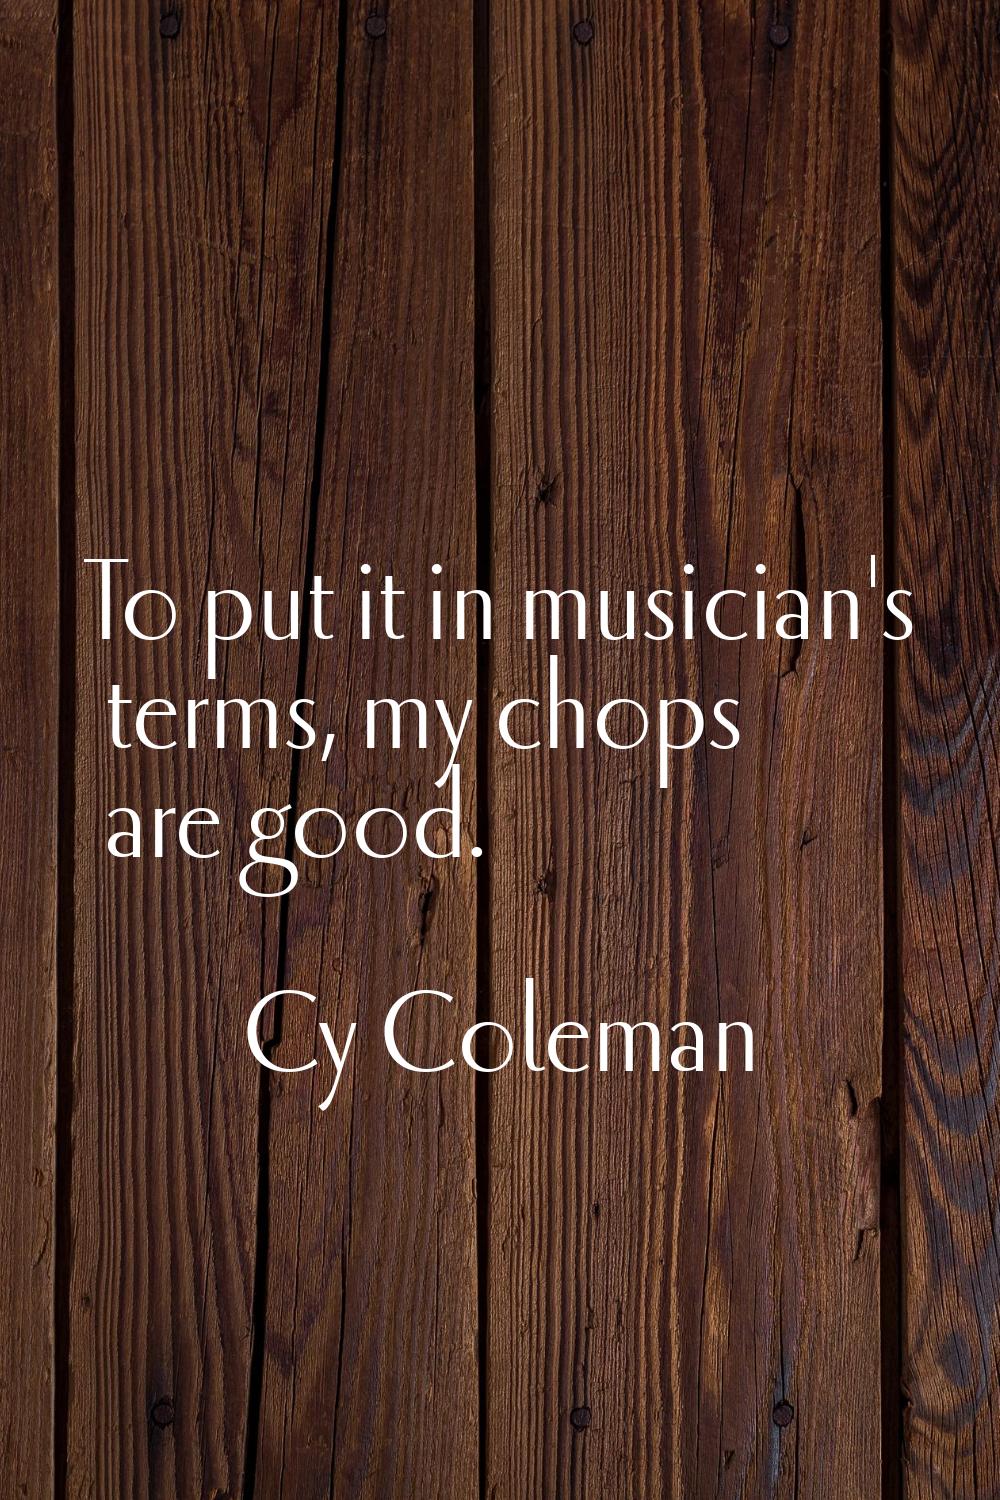 To put it in musician's terms, my chops are good.